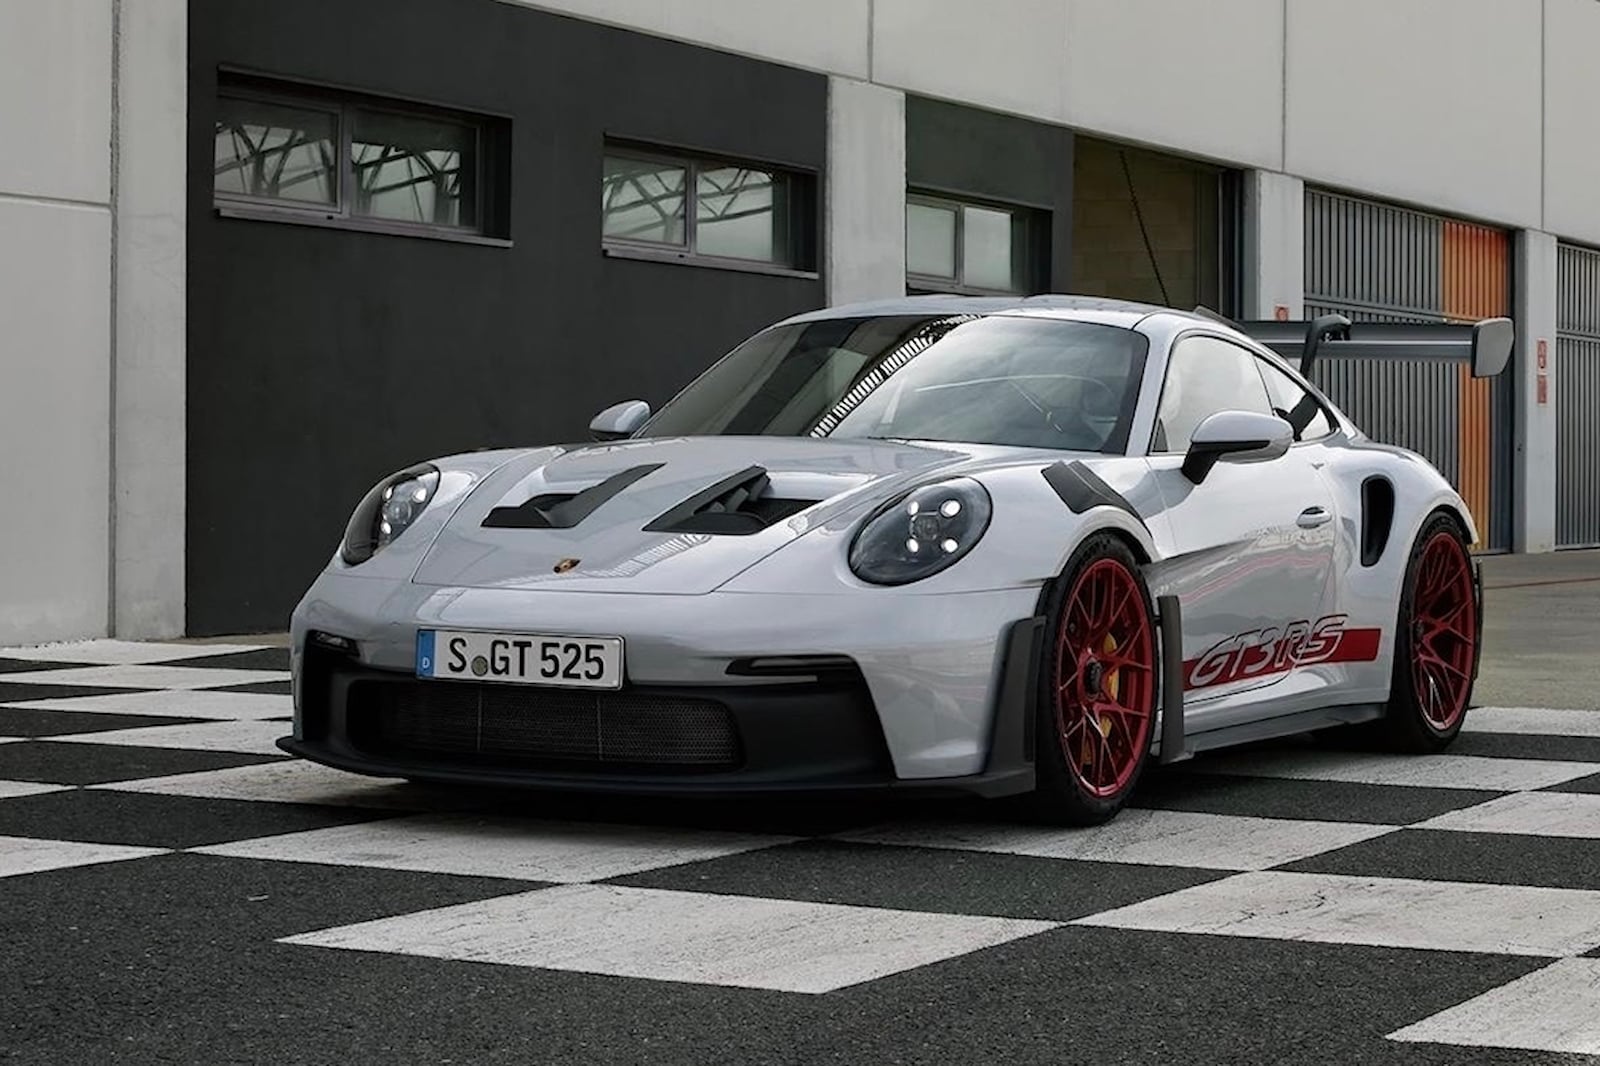 Porsche 911 GT3 RS On Road Price (Petrol), Features & Specs, Images